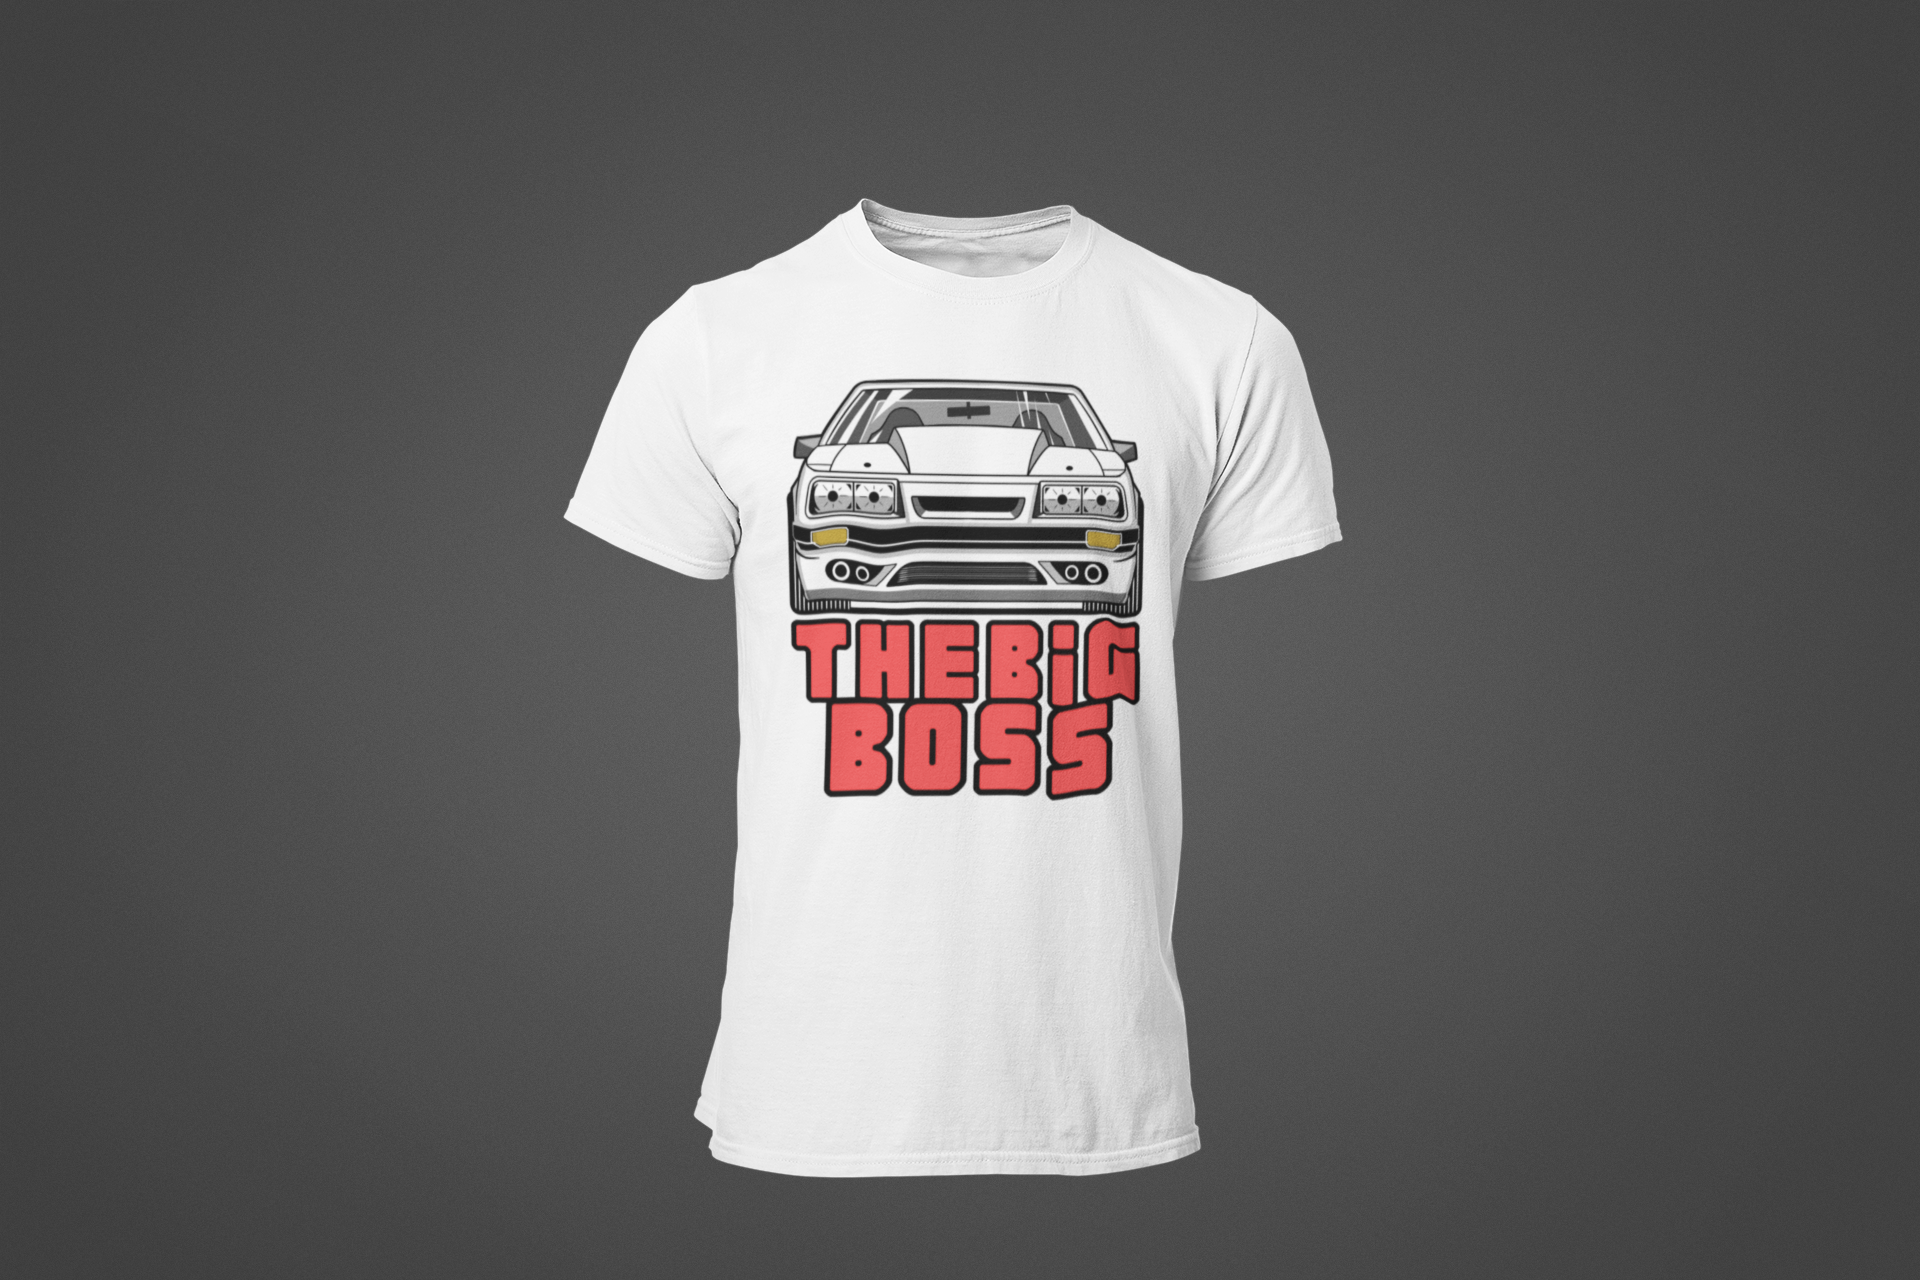 A white tee shirt with an image of a Ford Mustand Foxbody, and text reading "The Big Boss"